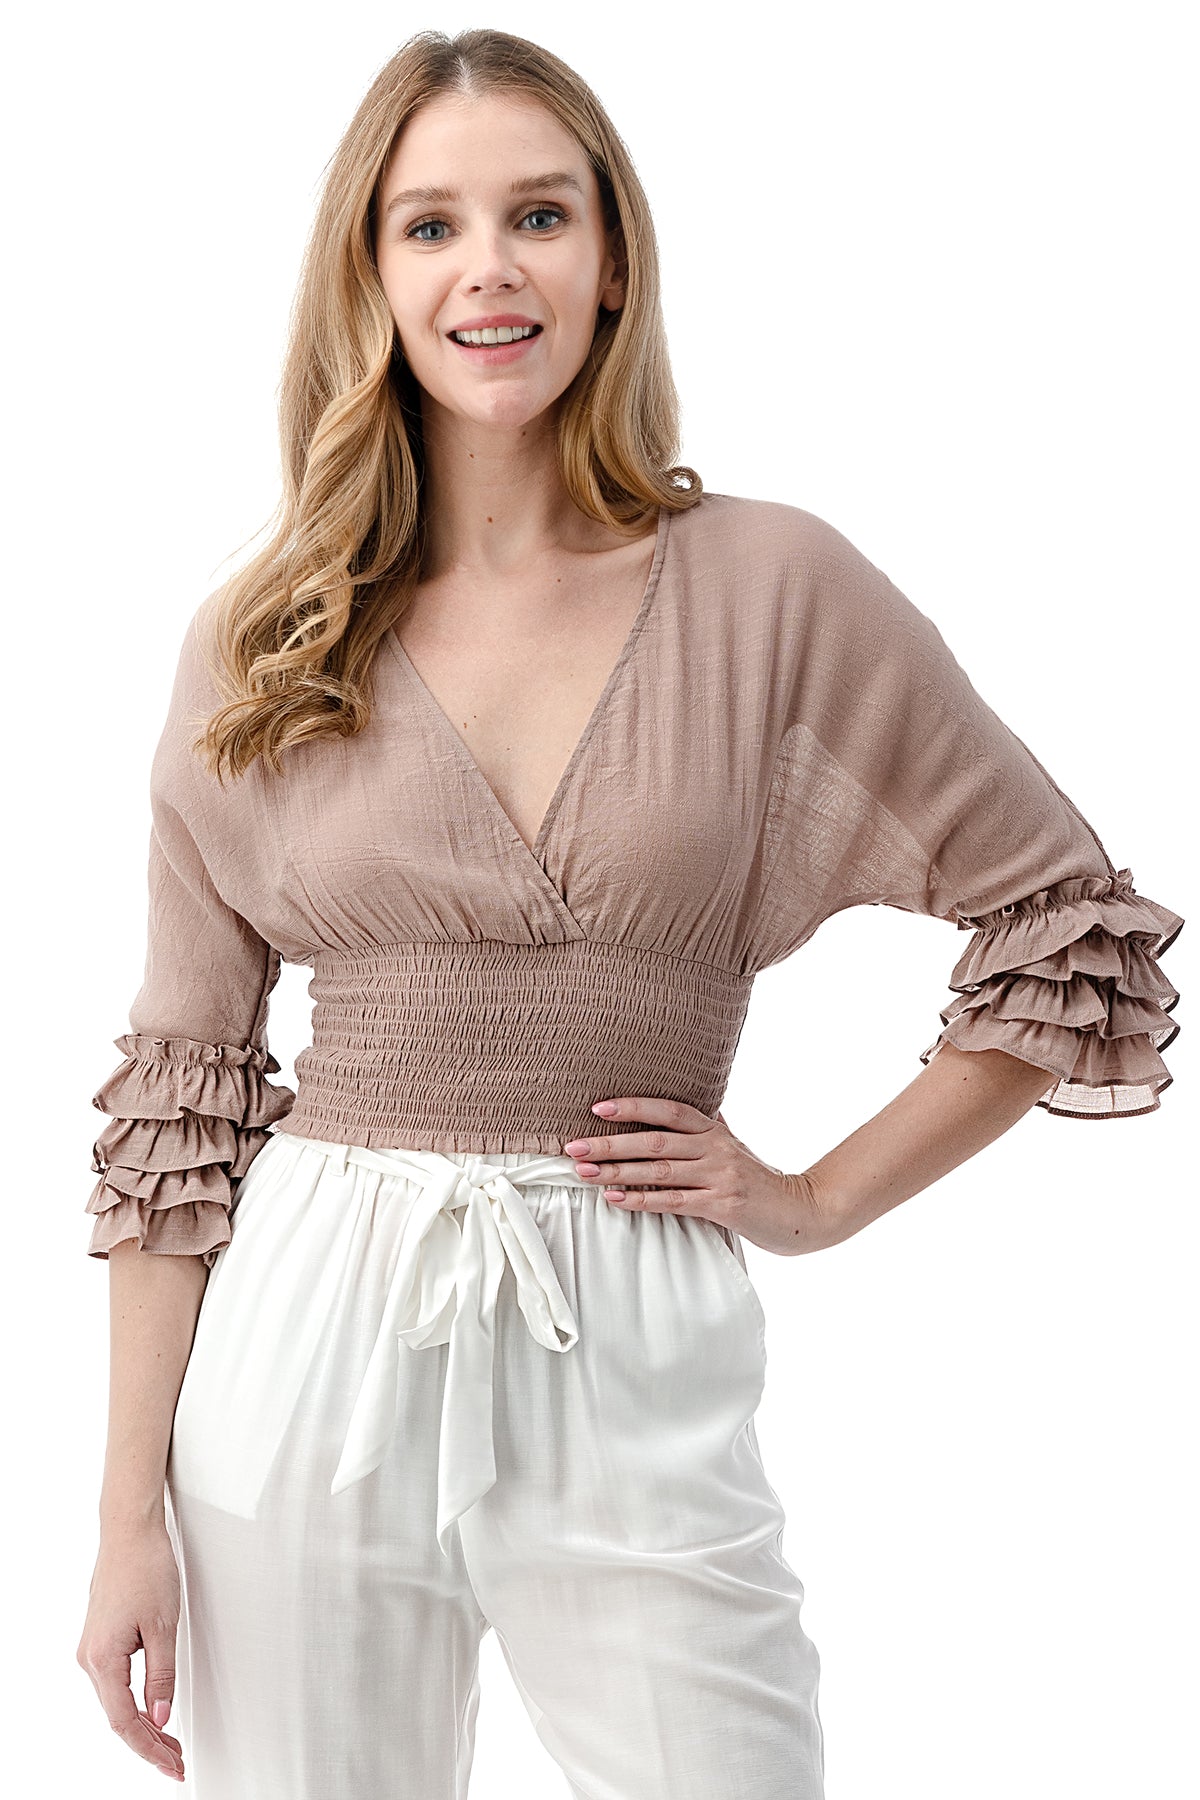 EDGY Land Girl's and Women's Layered Bell Sleeve V-Neck Bottom Smocked Fashion Blouse